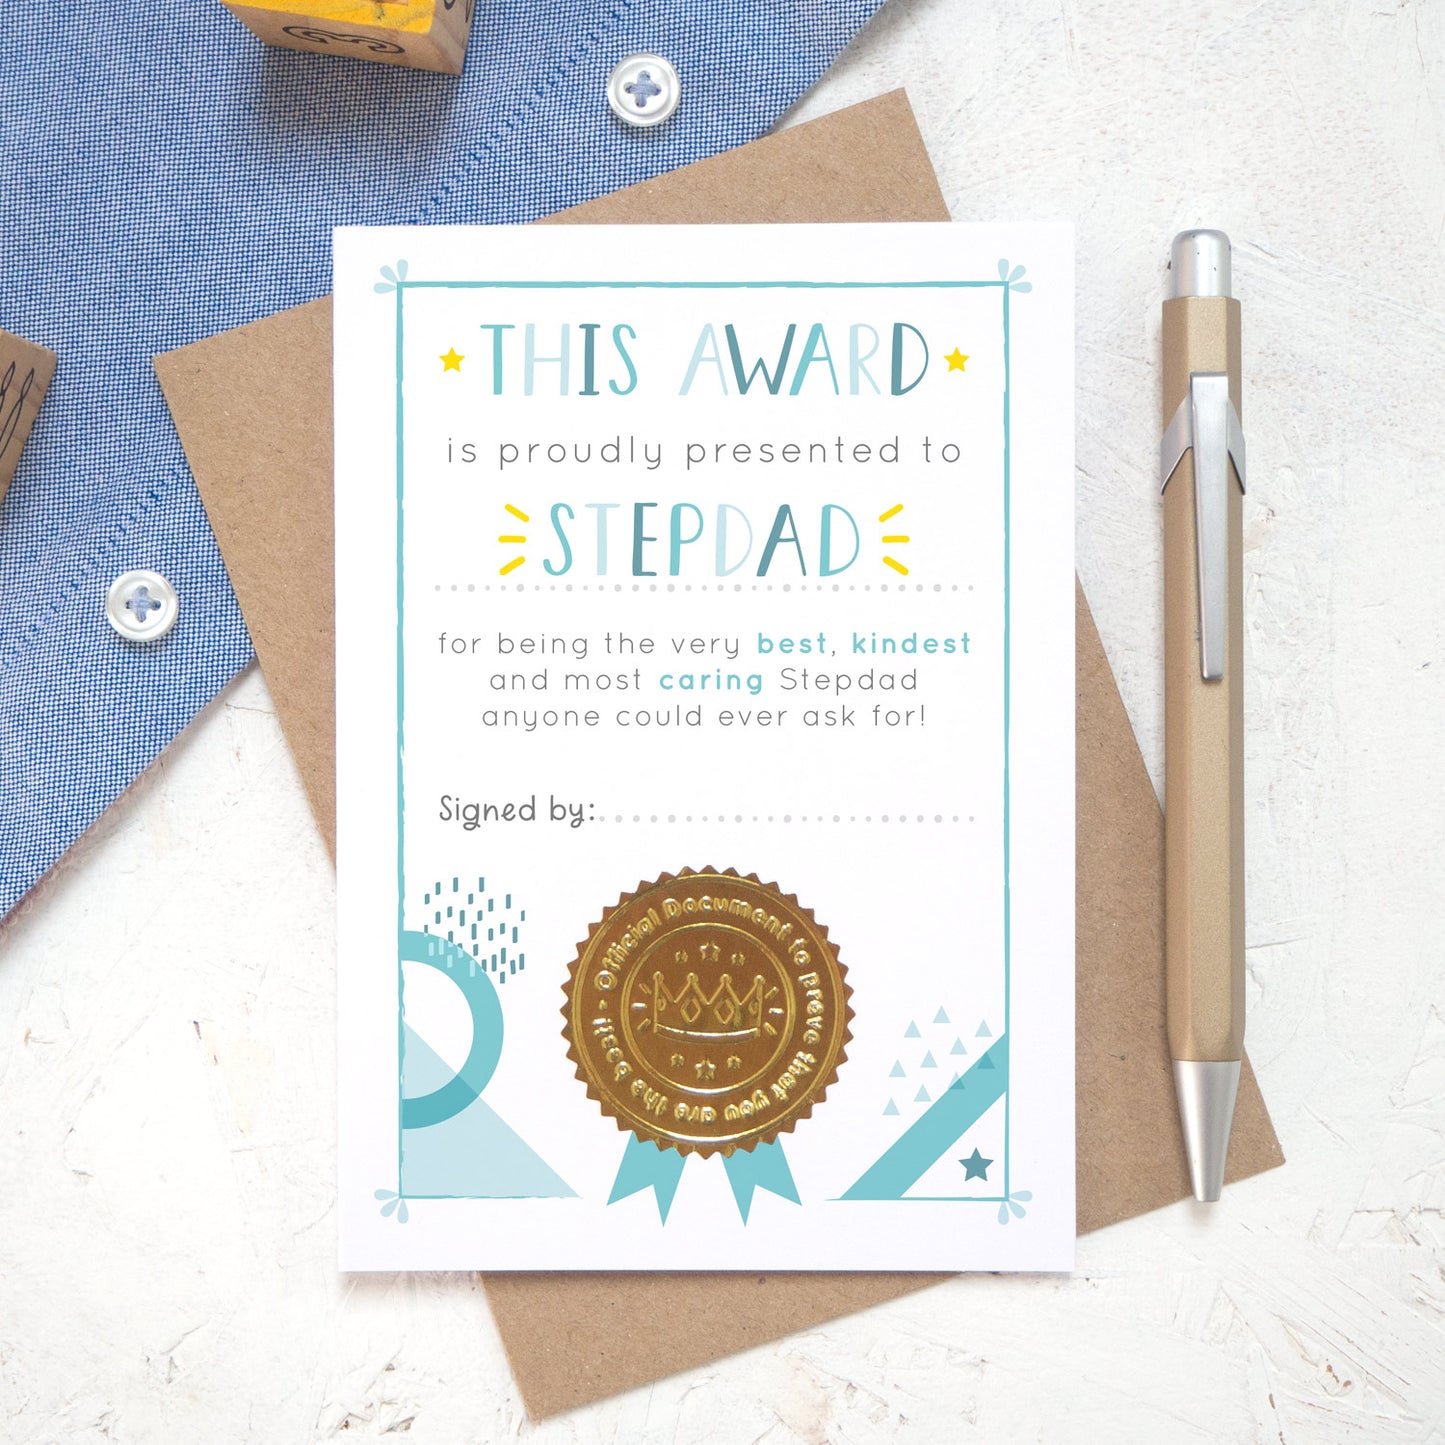 A stepdad award certificate card printed onto white card, with varying tones of blue and pops of yellow. This card is photographed on a white textured background and blue shirt.